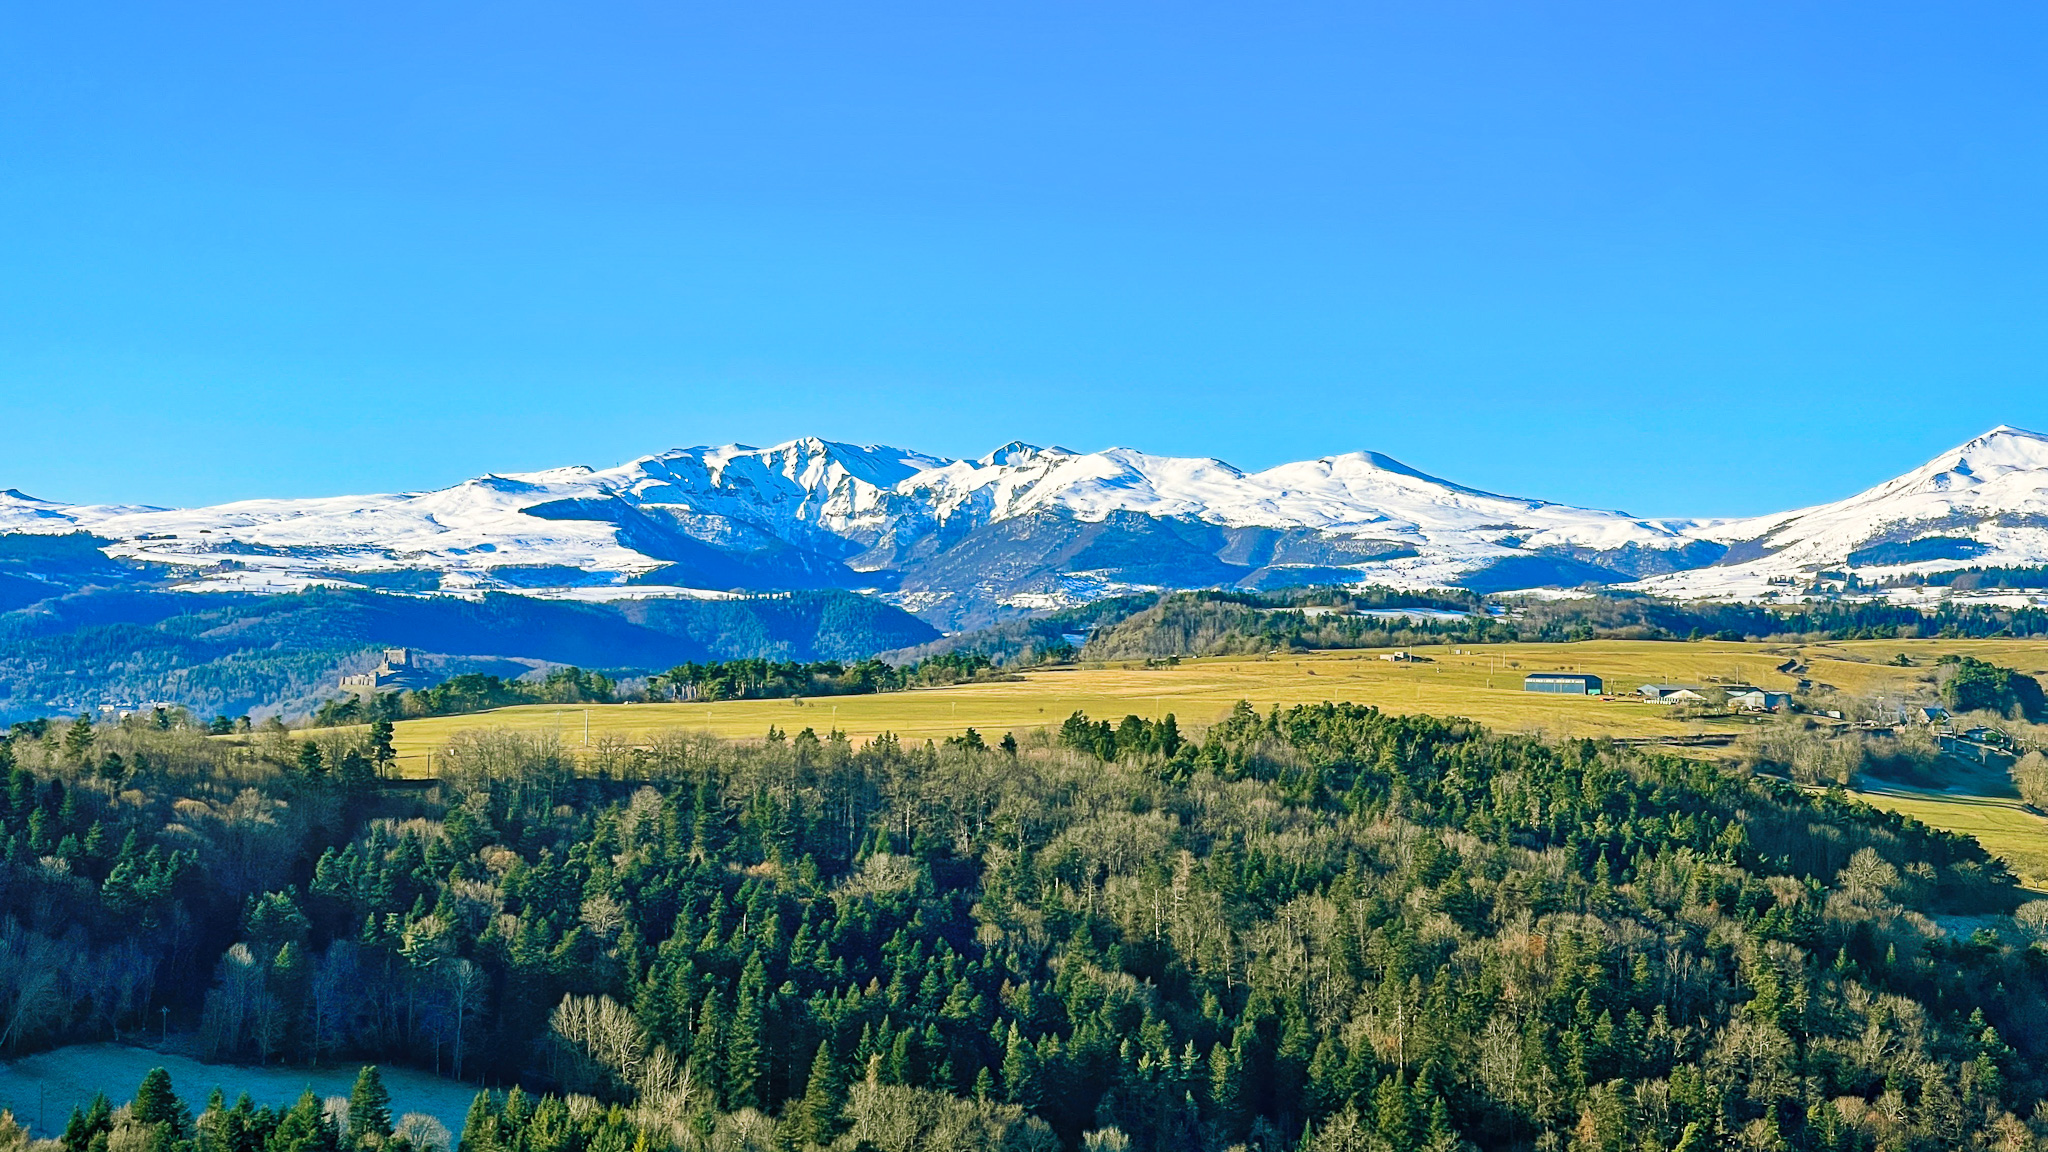 The Massif du Sancy and the Auvergne countryside